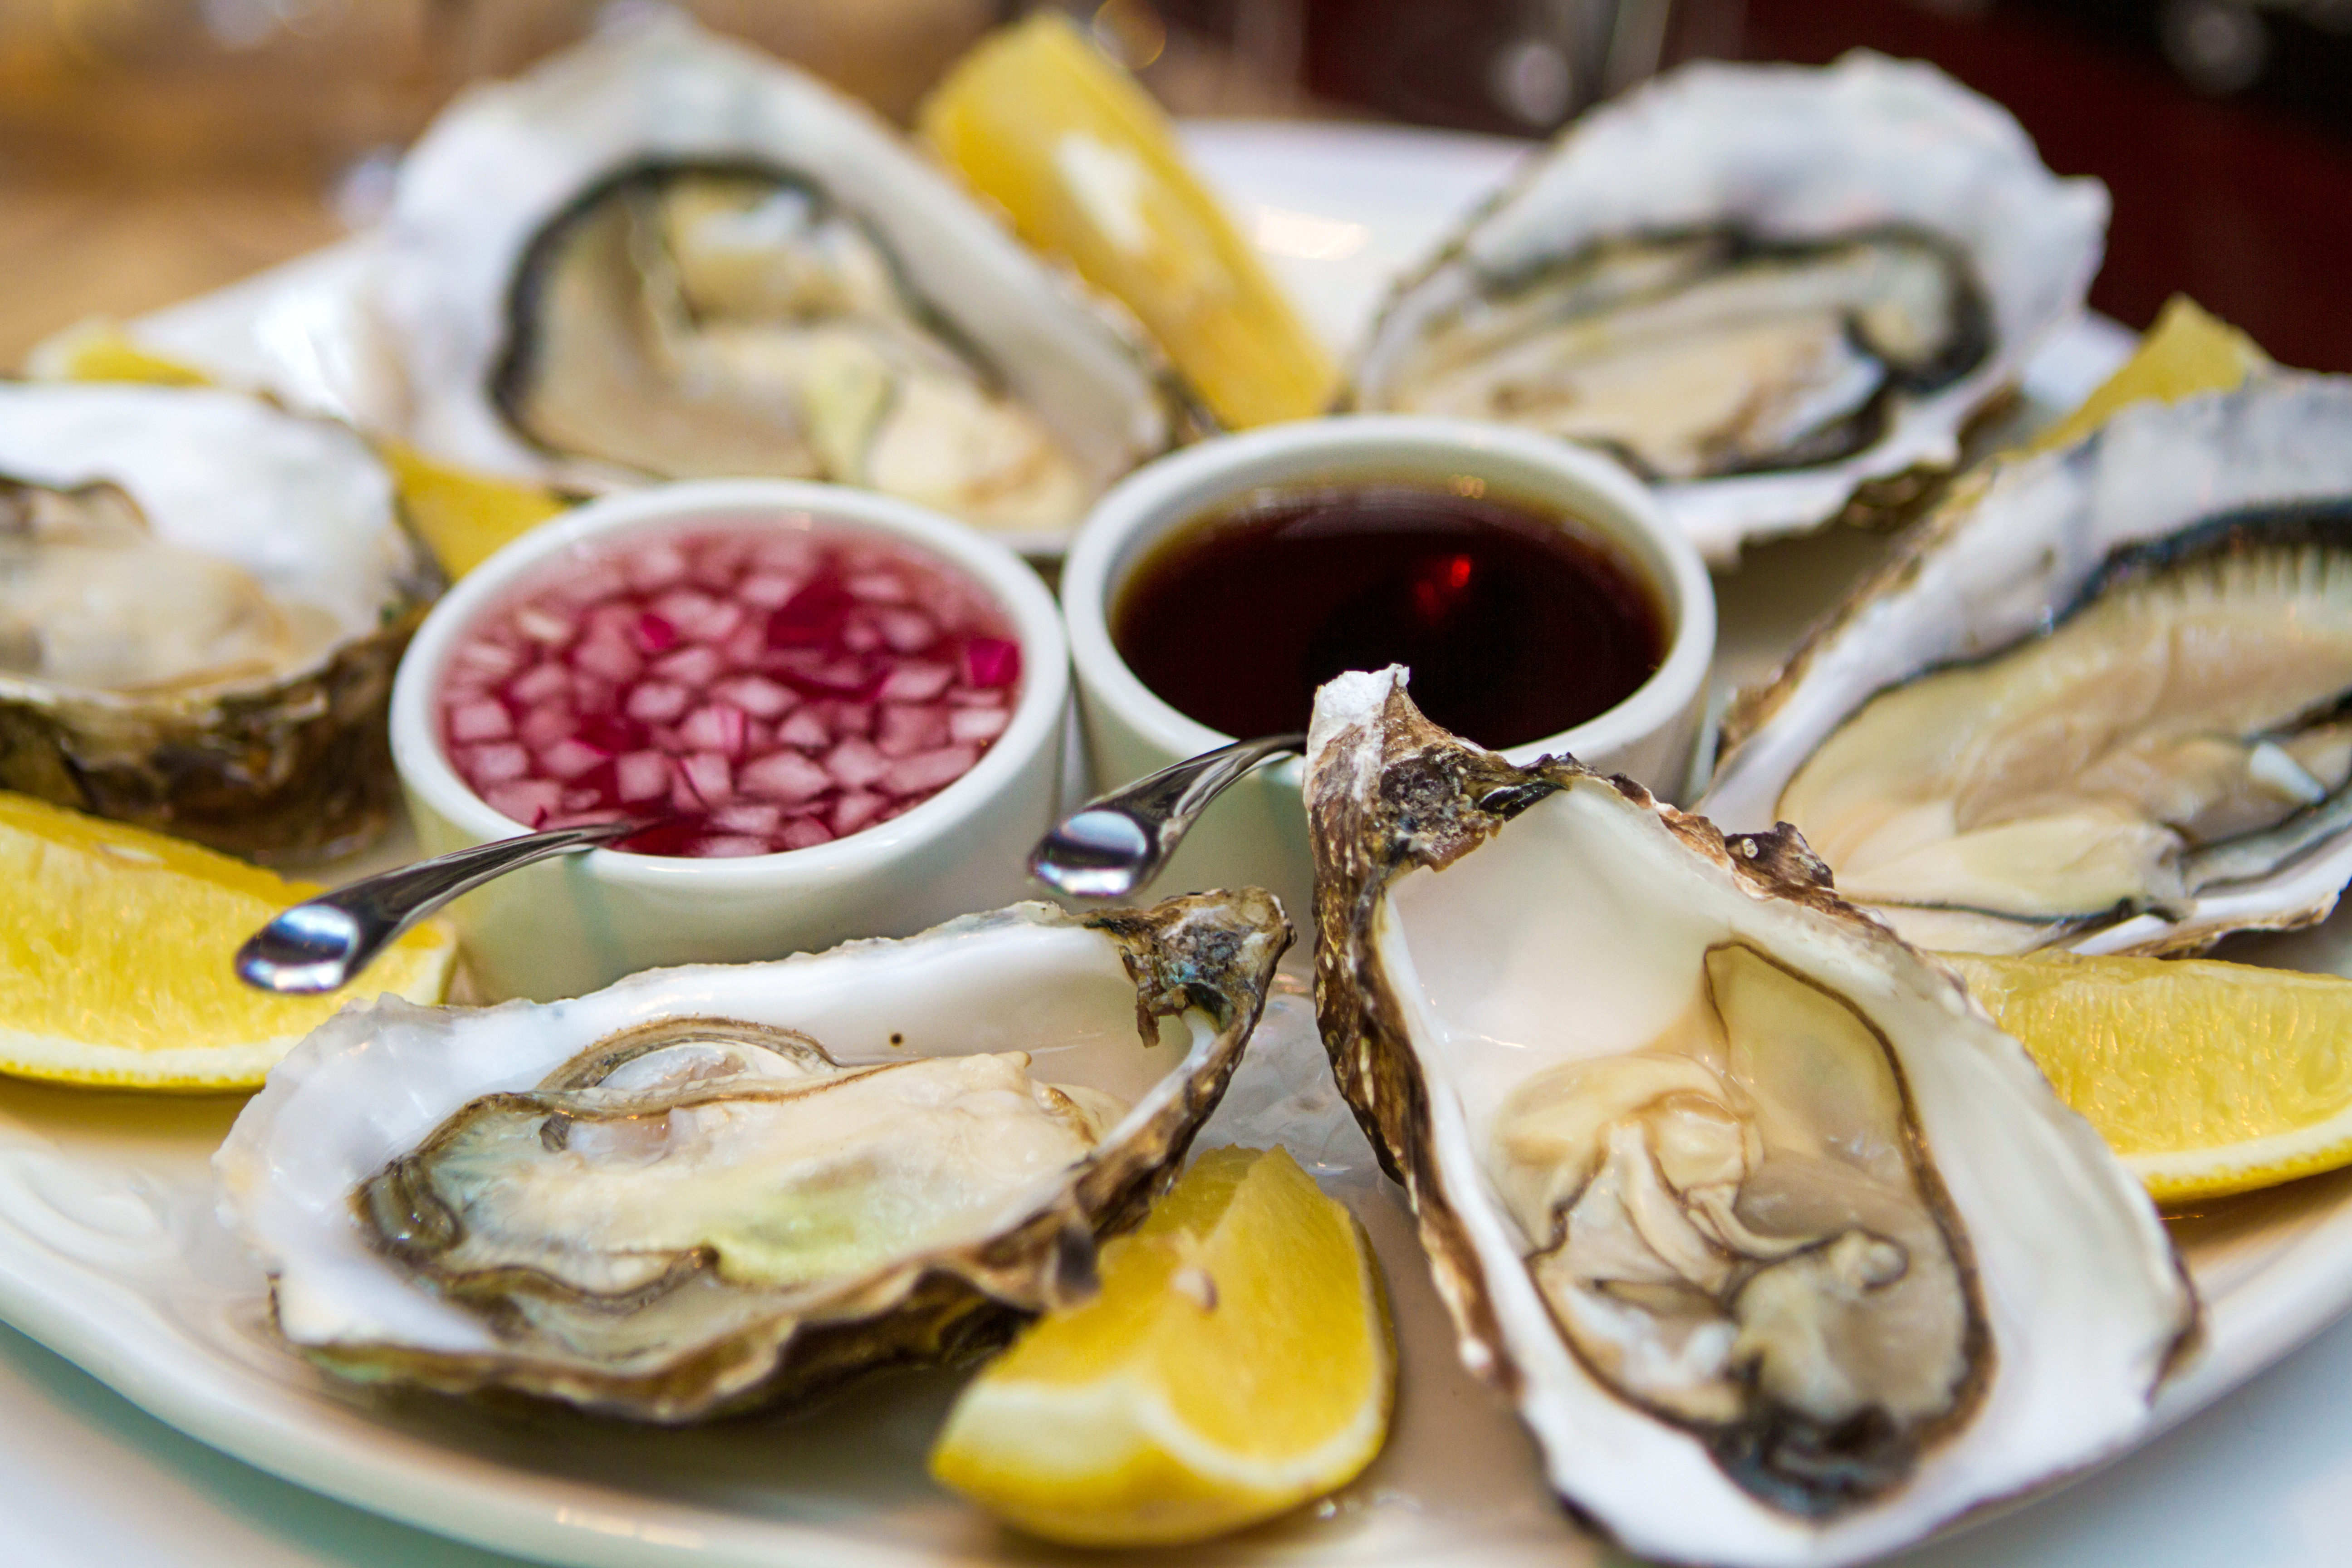 Aw shucks, a company in France is about to launch flavoured oysters